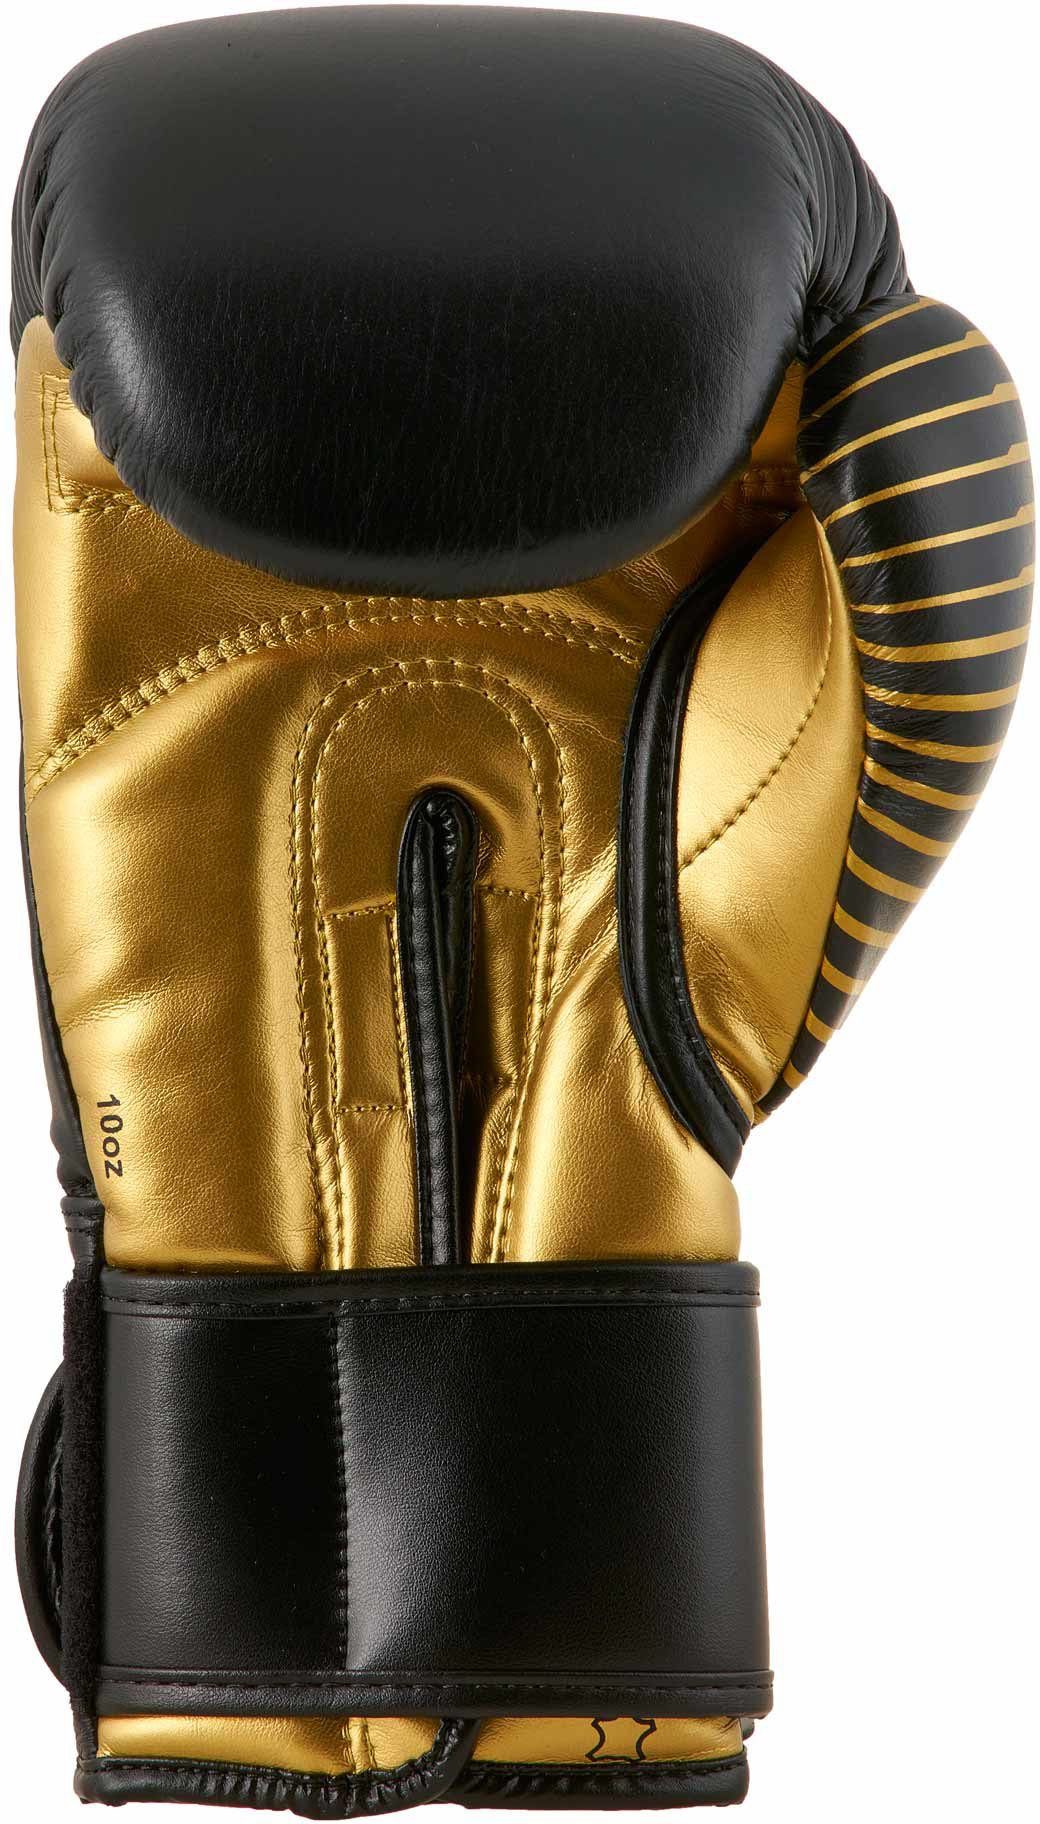 Performance black/gold Boxhandschuhe Competition adidas Handschuh